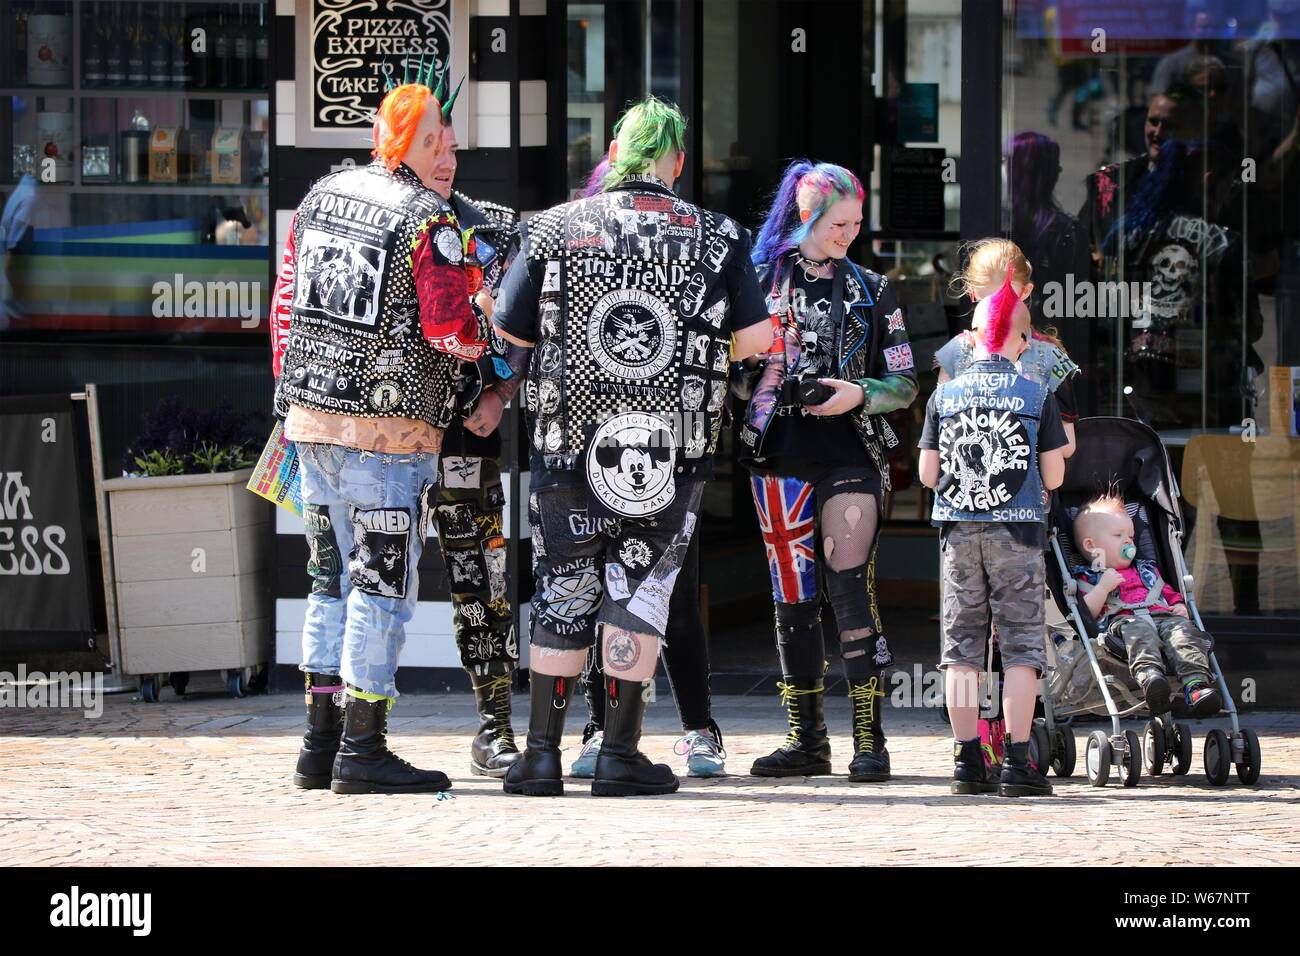 Blackpool, Lancashire, UK. 31st July, 2019. The fabulous Punk Rebellion festival returns to the Winter Gardens in Blackpool for a weekend of live punk rock music. The Rebellion Festival, formerly Holidays in the Sun and the Wasted Festival is a British punk rock festival first held in 1996. This open to all event draws thousands of overseas visitors to see all their favourite punk musicians in one place. Credit: Cernan Elias/Alamy Live News Stock Photo